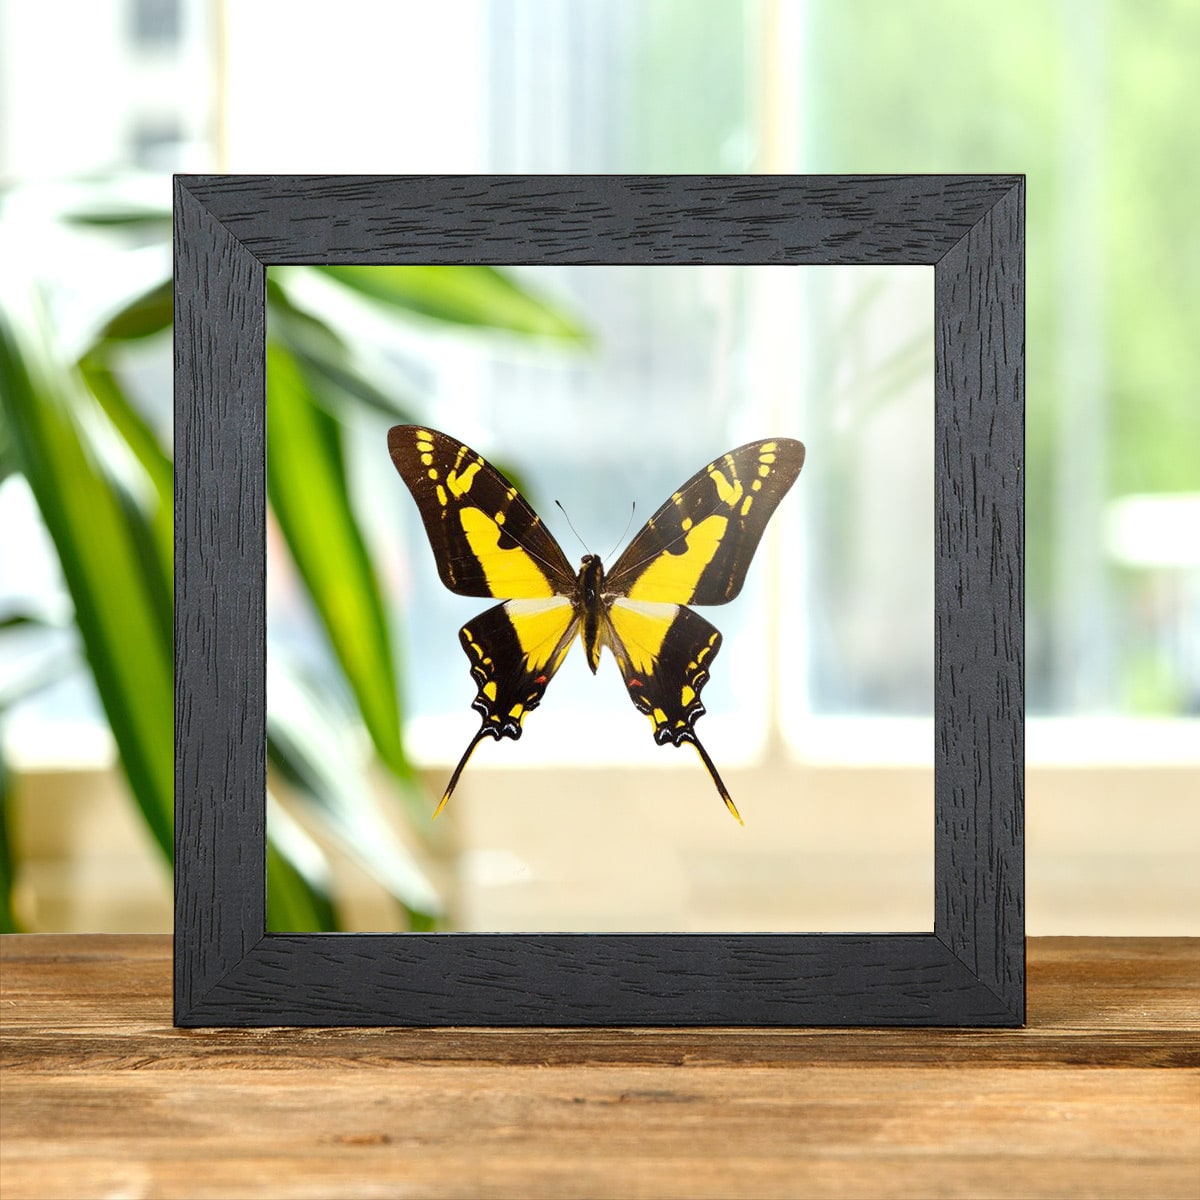 Minibeast Yellow Swordtail Butterfly in Clear Glass Frame (Eurytides thyastes thyastinus)